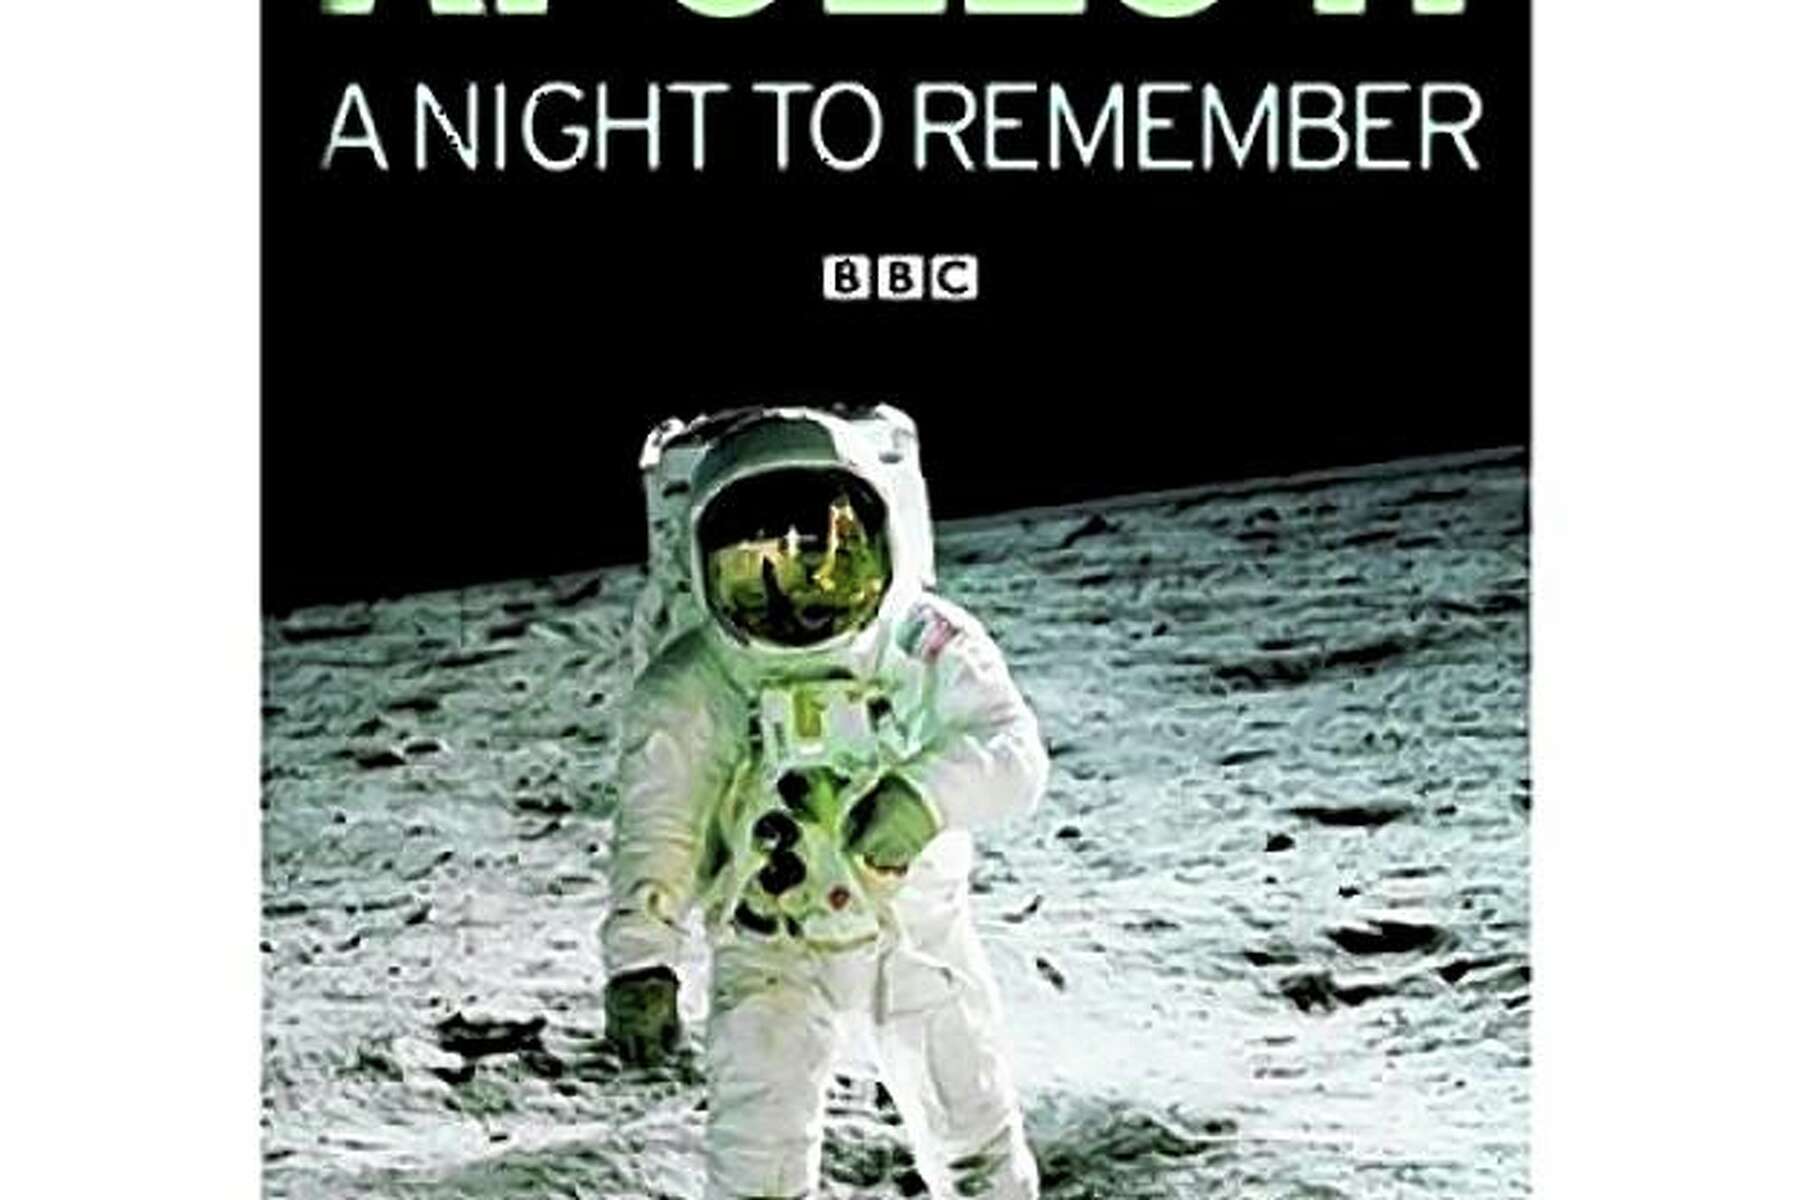 A BBC night to remember